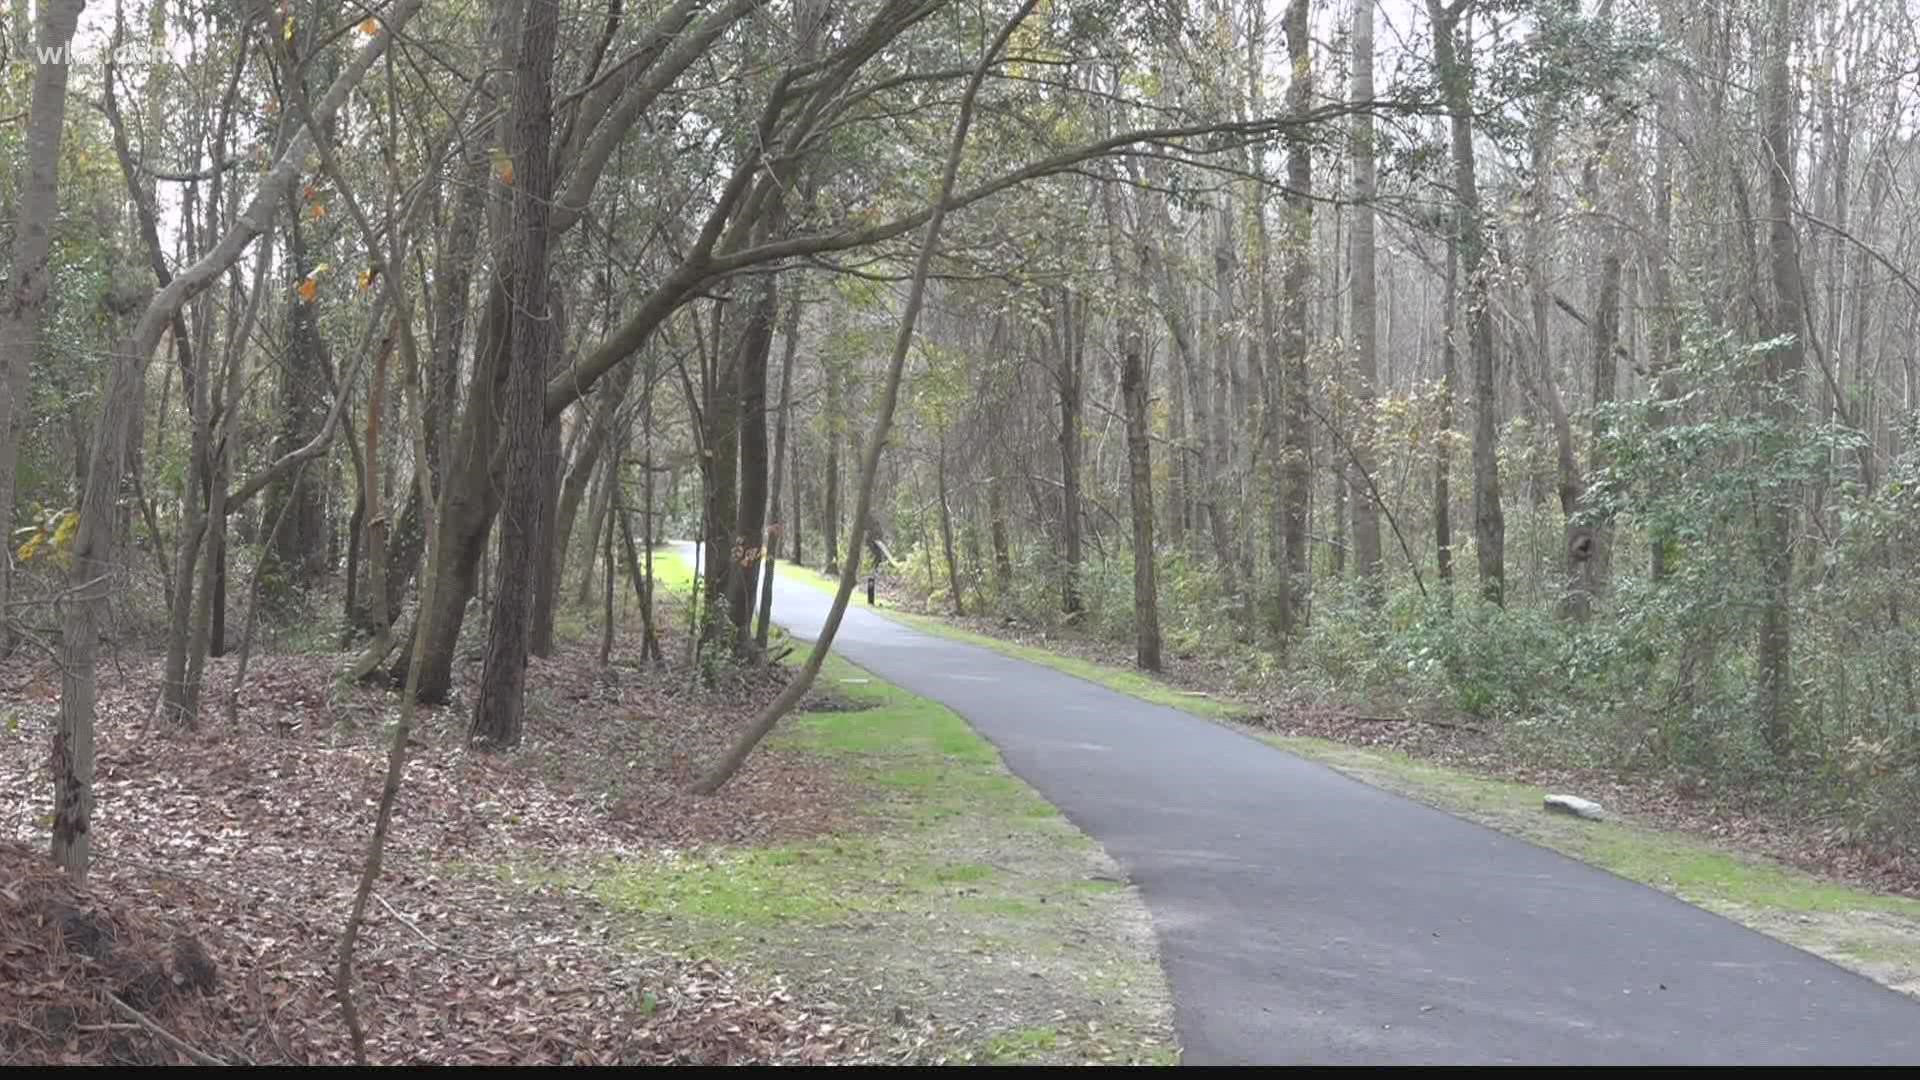 A new greenway is connecting two parks in Sumter county and will stretch over three miles.